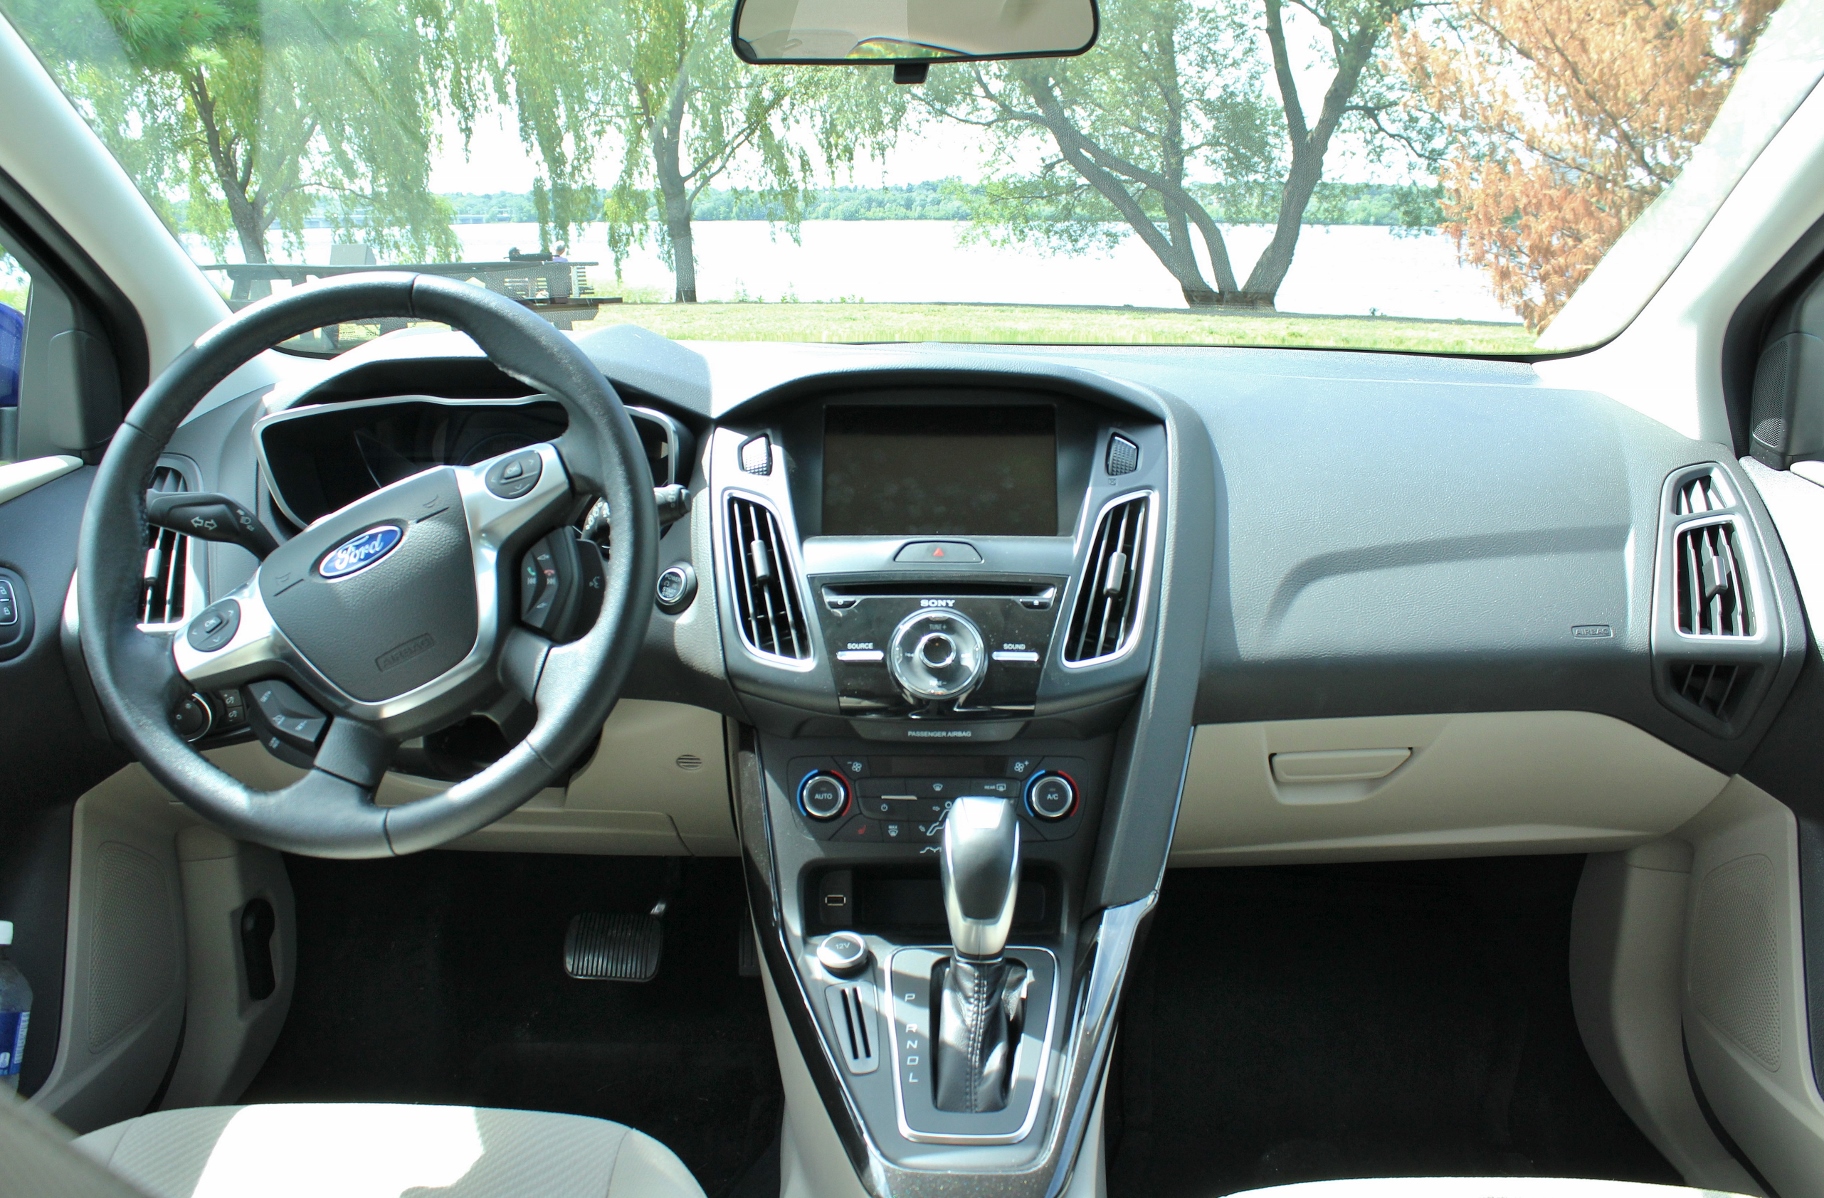 2015 Ford Focus Electric: no gas, no problem? - Driven to Attraction